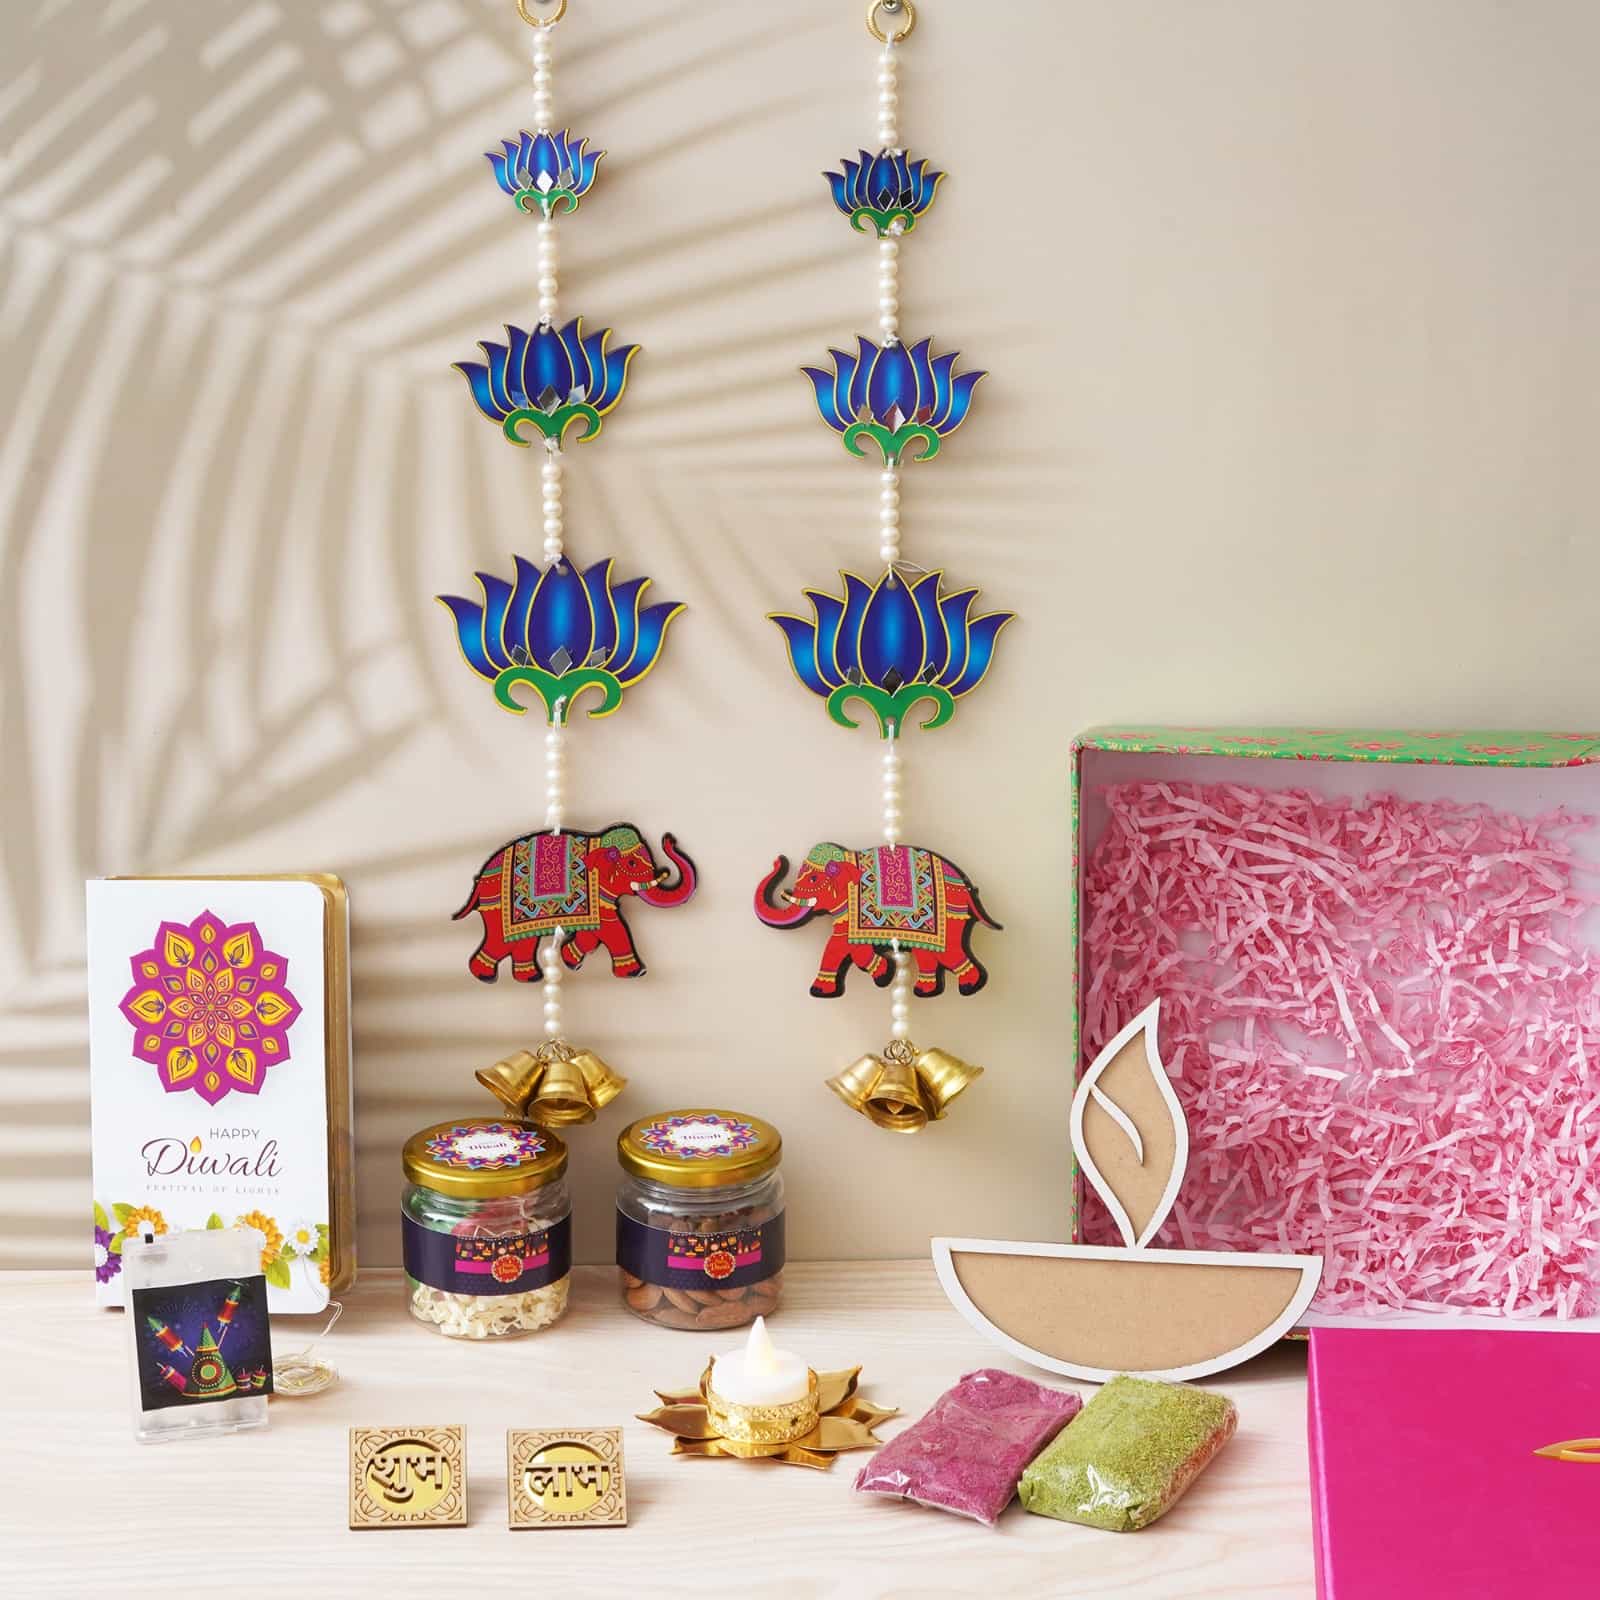 Diwali Gift Traditions – The Festival of Lights is a Time for Family &  Friends